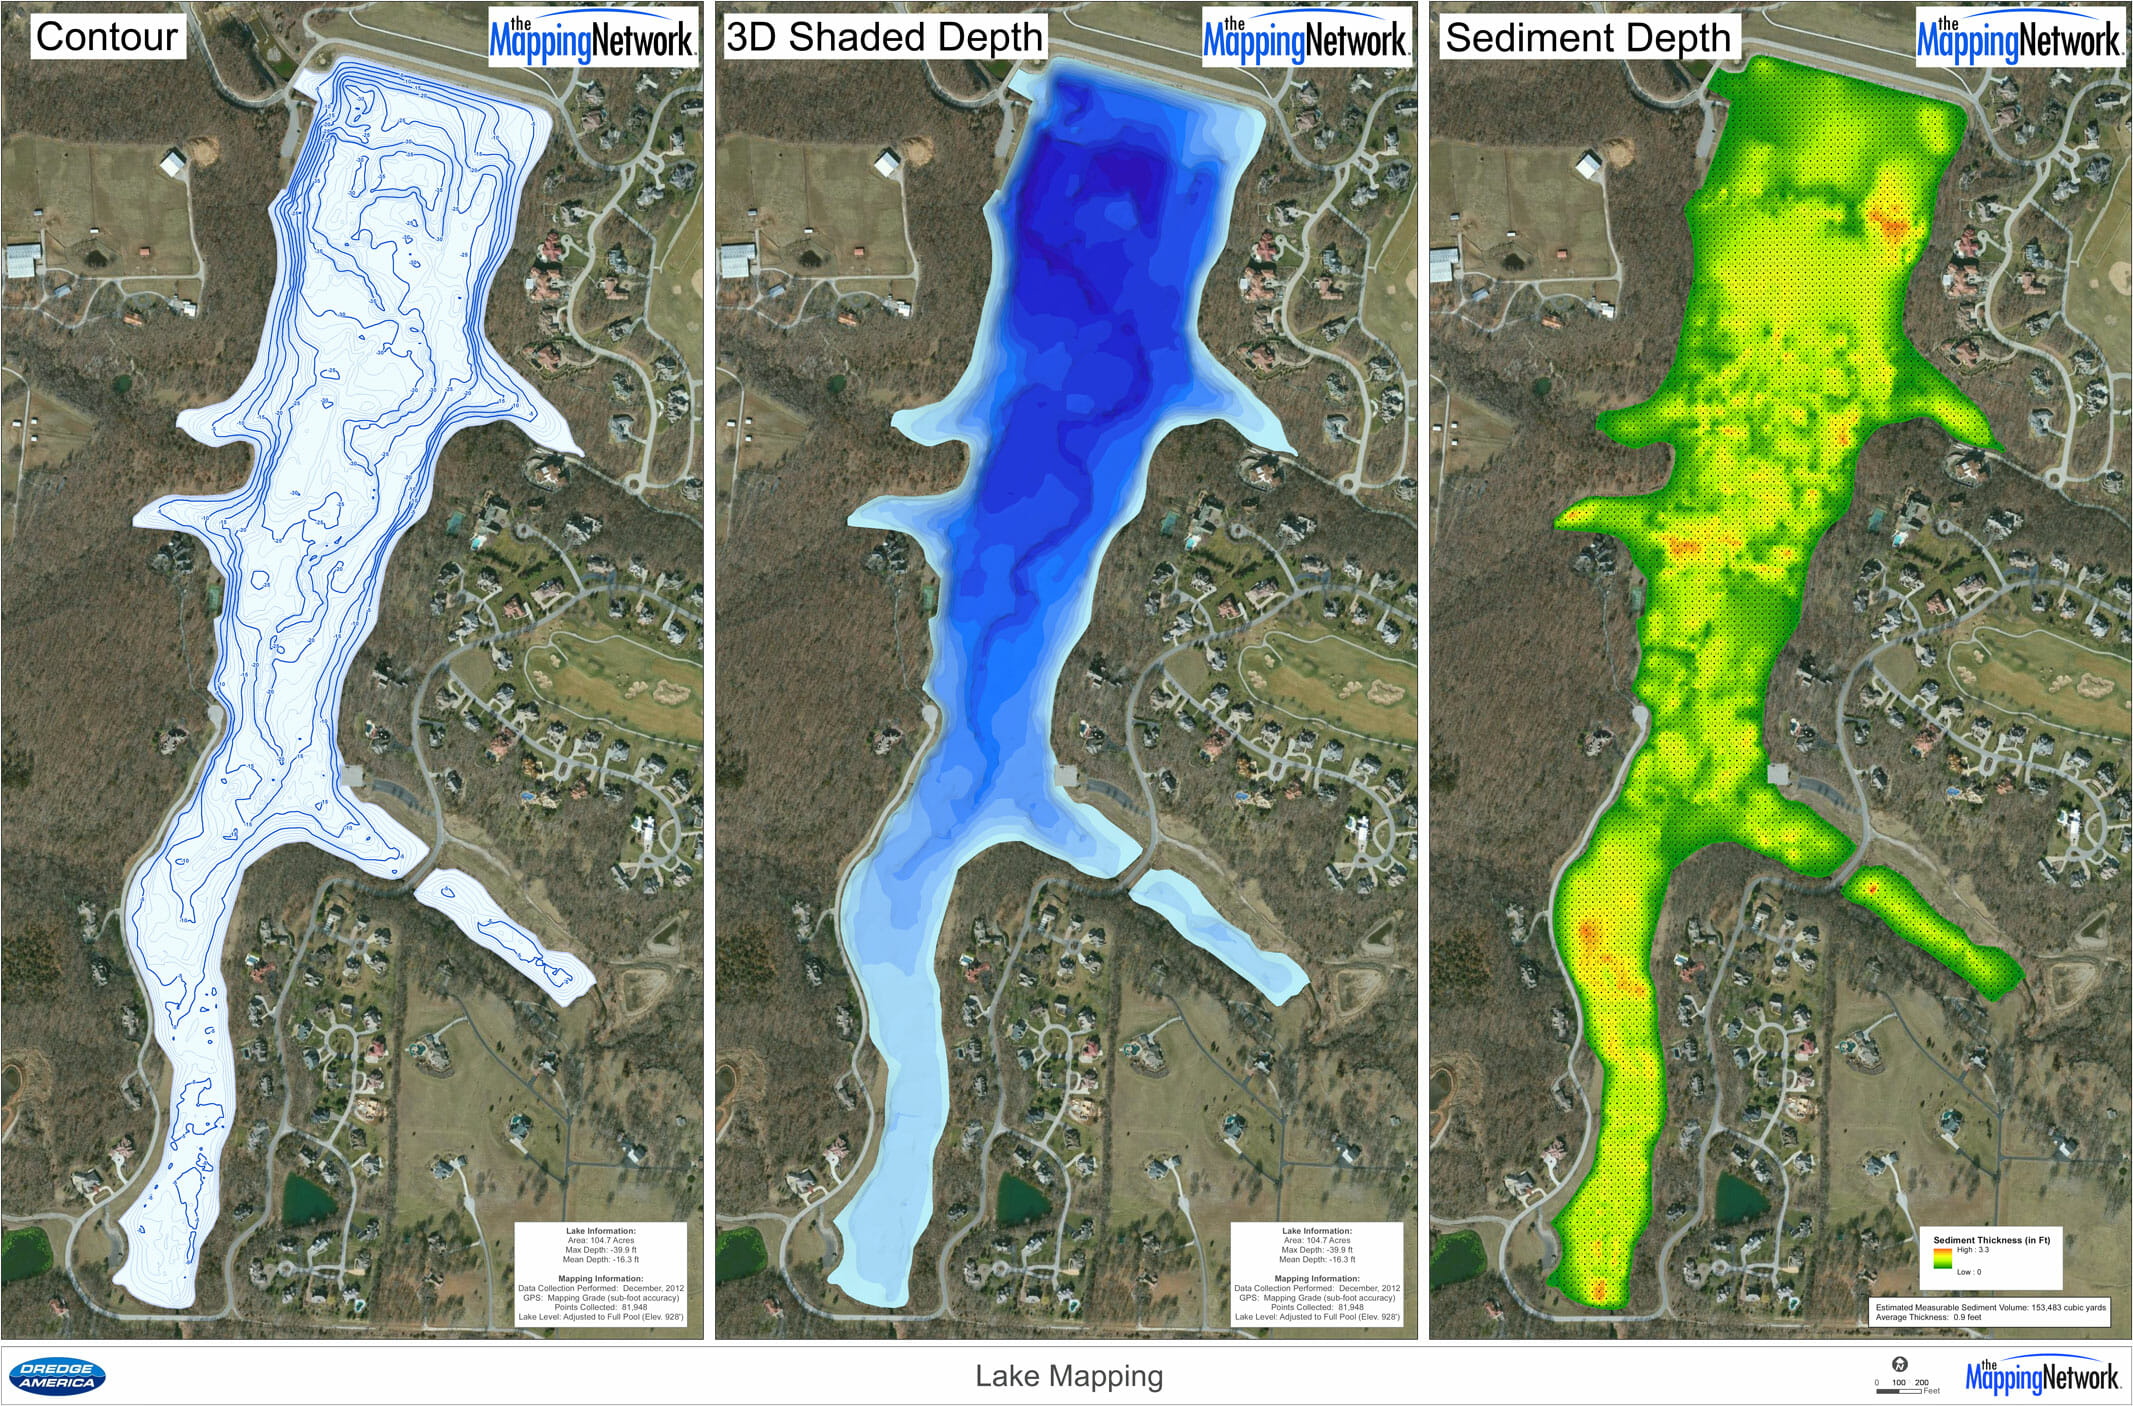 A lake surveyed by The Mapping Network included creating a contour and 3D shaded depth map of the current lake depths.  Also a sediment thickness map of the entire lake was generated. 